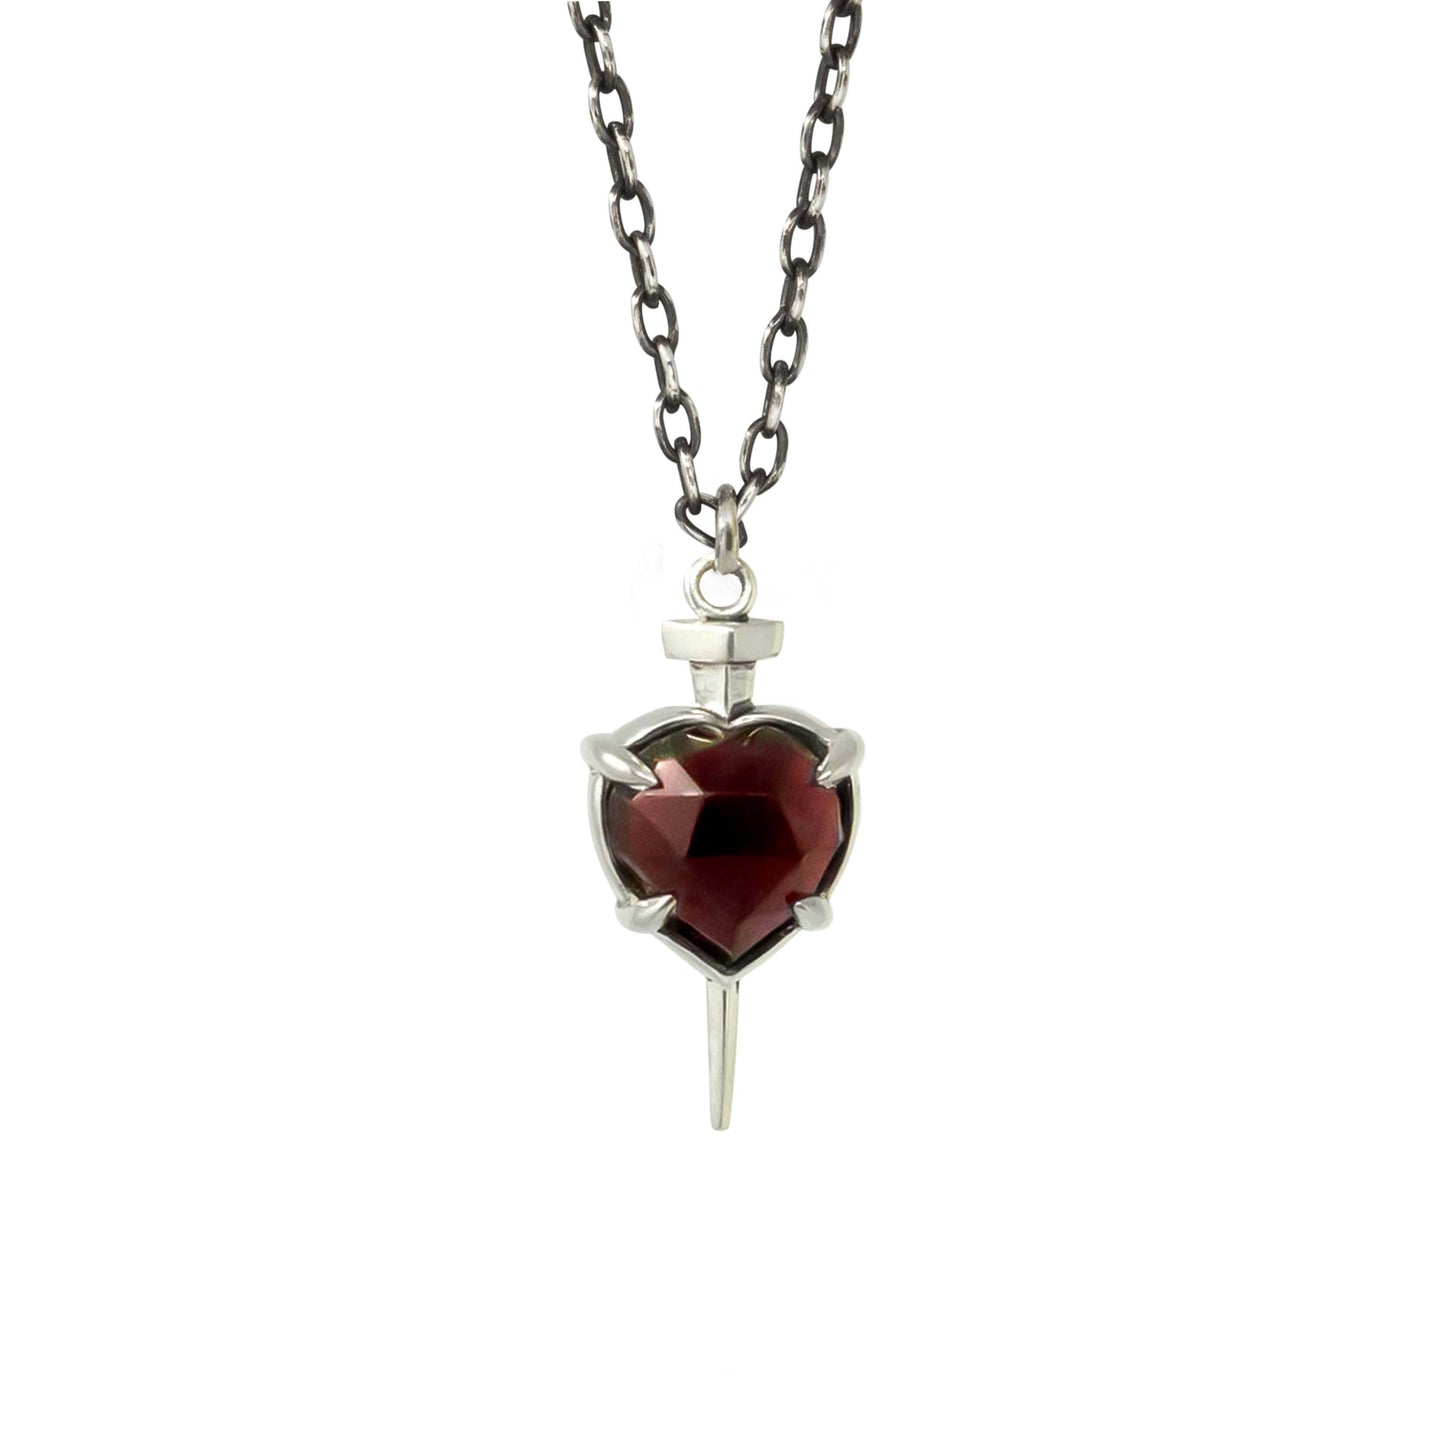 Nail Through The Heart Necklace with Garnet  - Sterling Silver - Futaba Hayashi